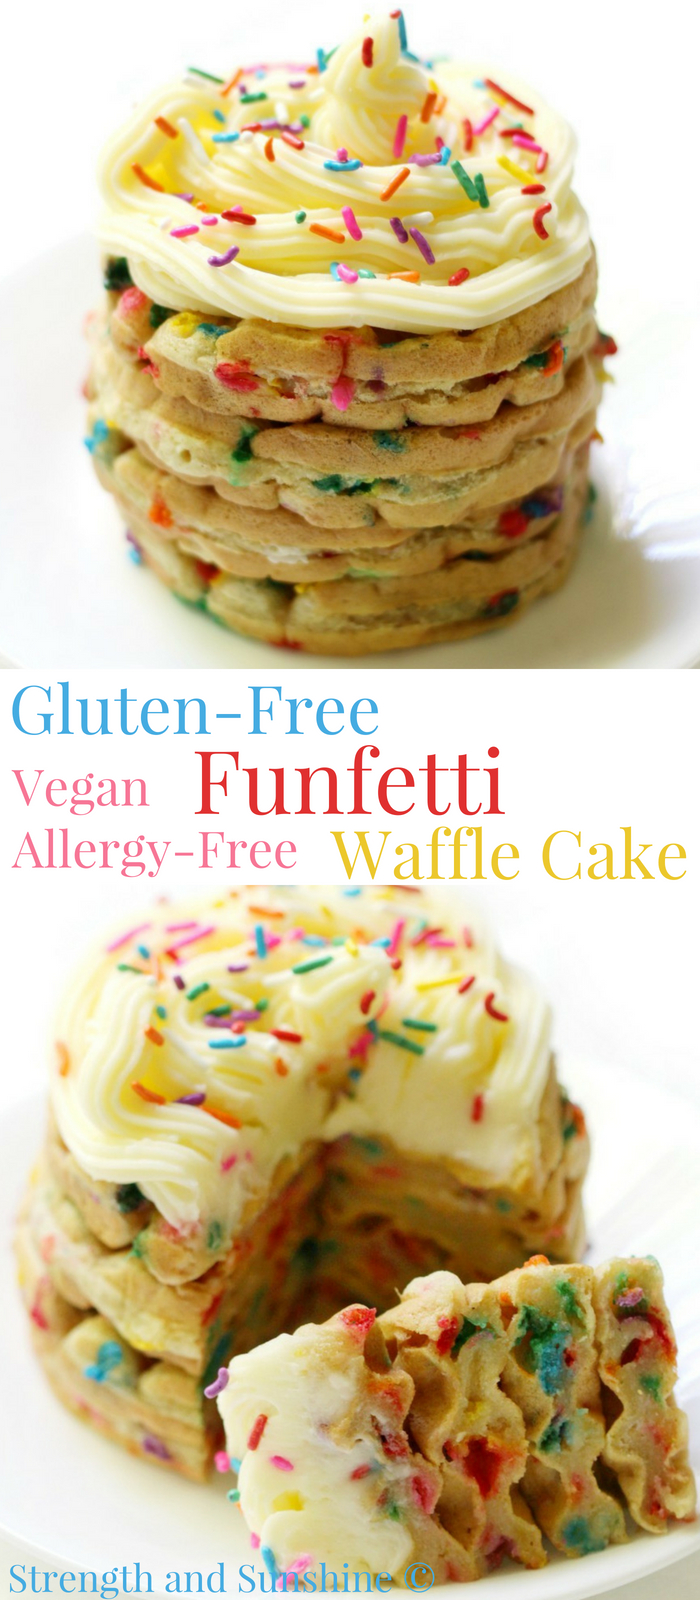 Gluten-Free Funfetti Waffle Cake (Vegan, Allergy-Free) | Strength and Sunshine @RebeccaGF666 A fun way to celebrate any occasion! This colorful Gluten-Free Funfetti Waffle Cake is vegan, top 8 allergy-free, requires minimal ingredients, while still being a dessert (or breakfast) recipe to remember! Whether it's a birthday or fun milestone, kids and adults this fun and easy creation!